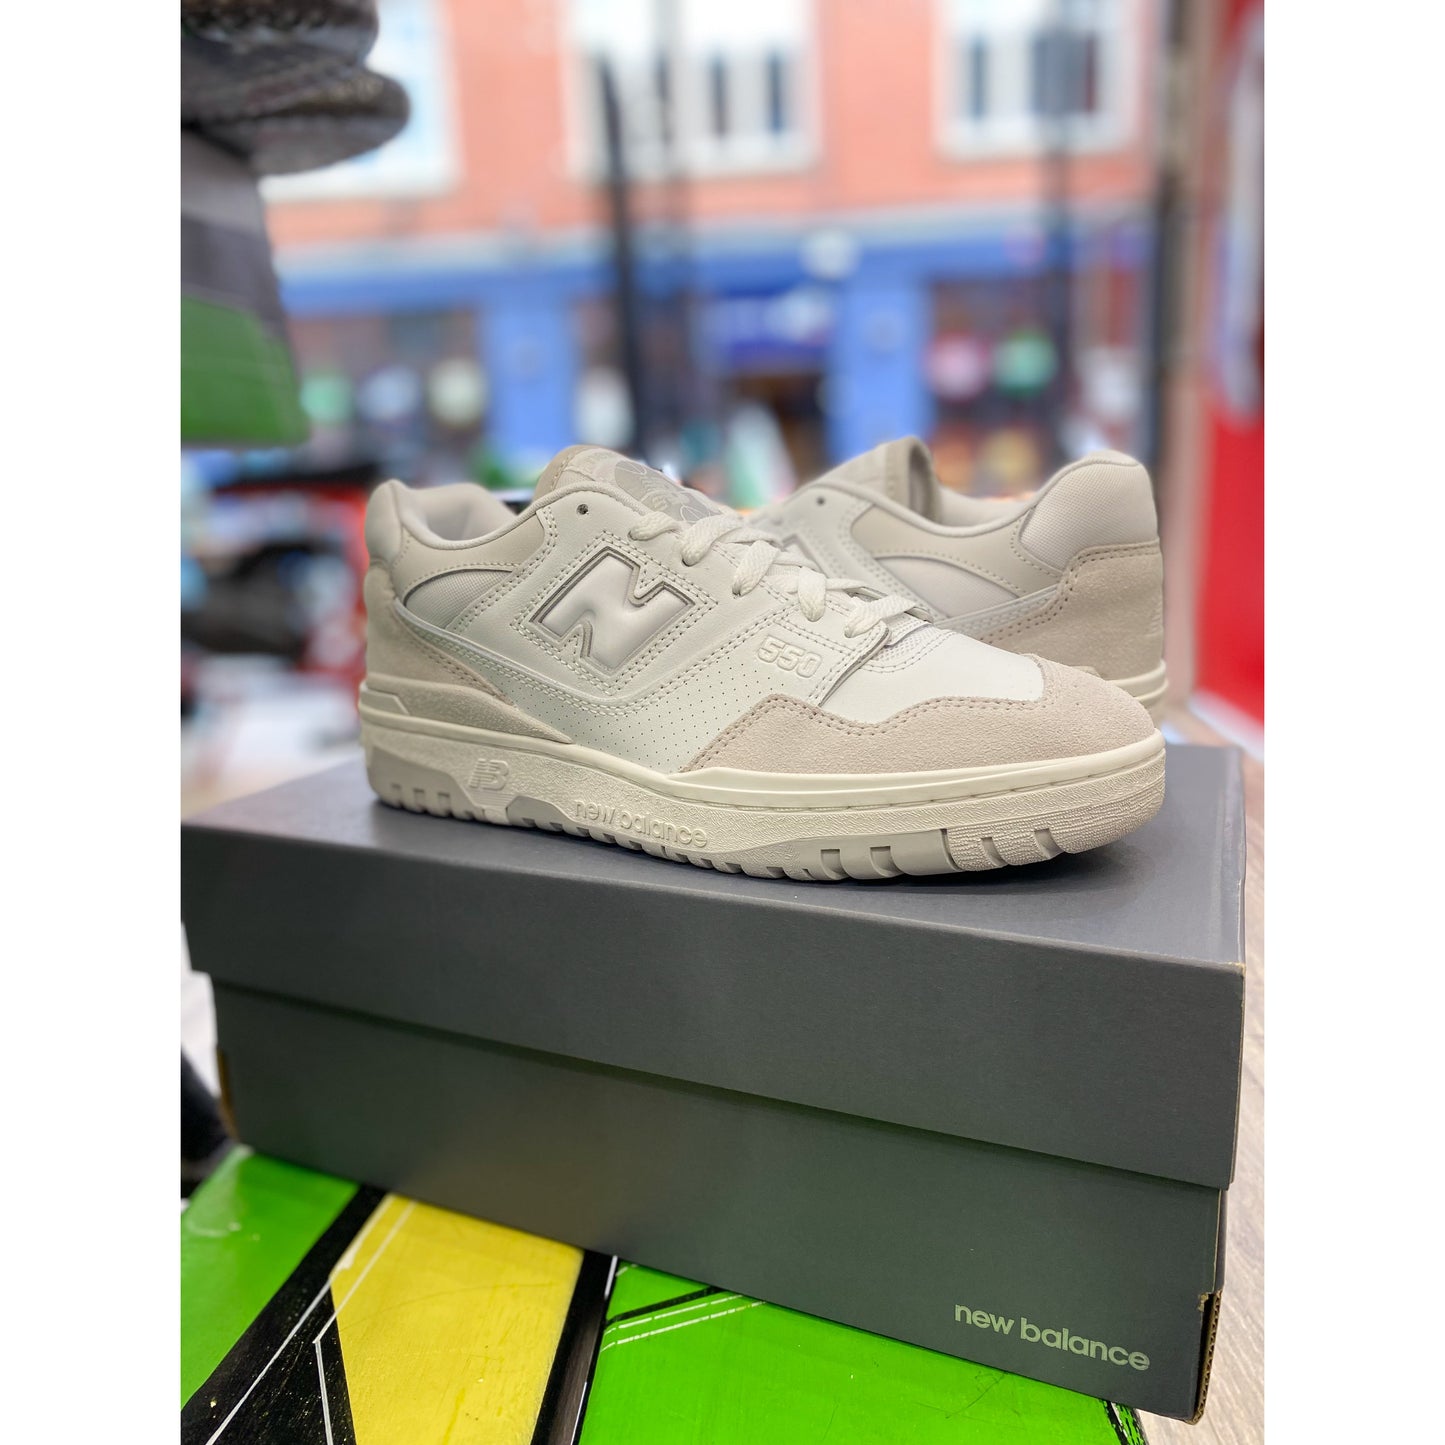 New Balance 550 White Summer Fog by New Balance from £175.00